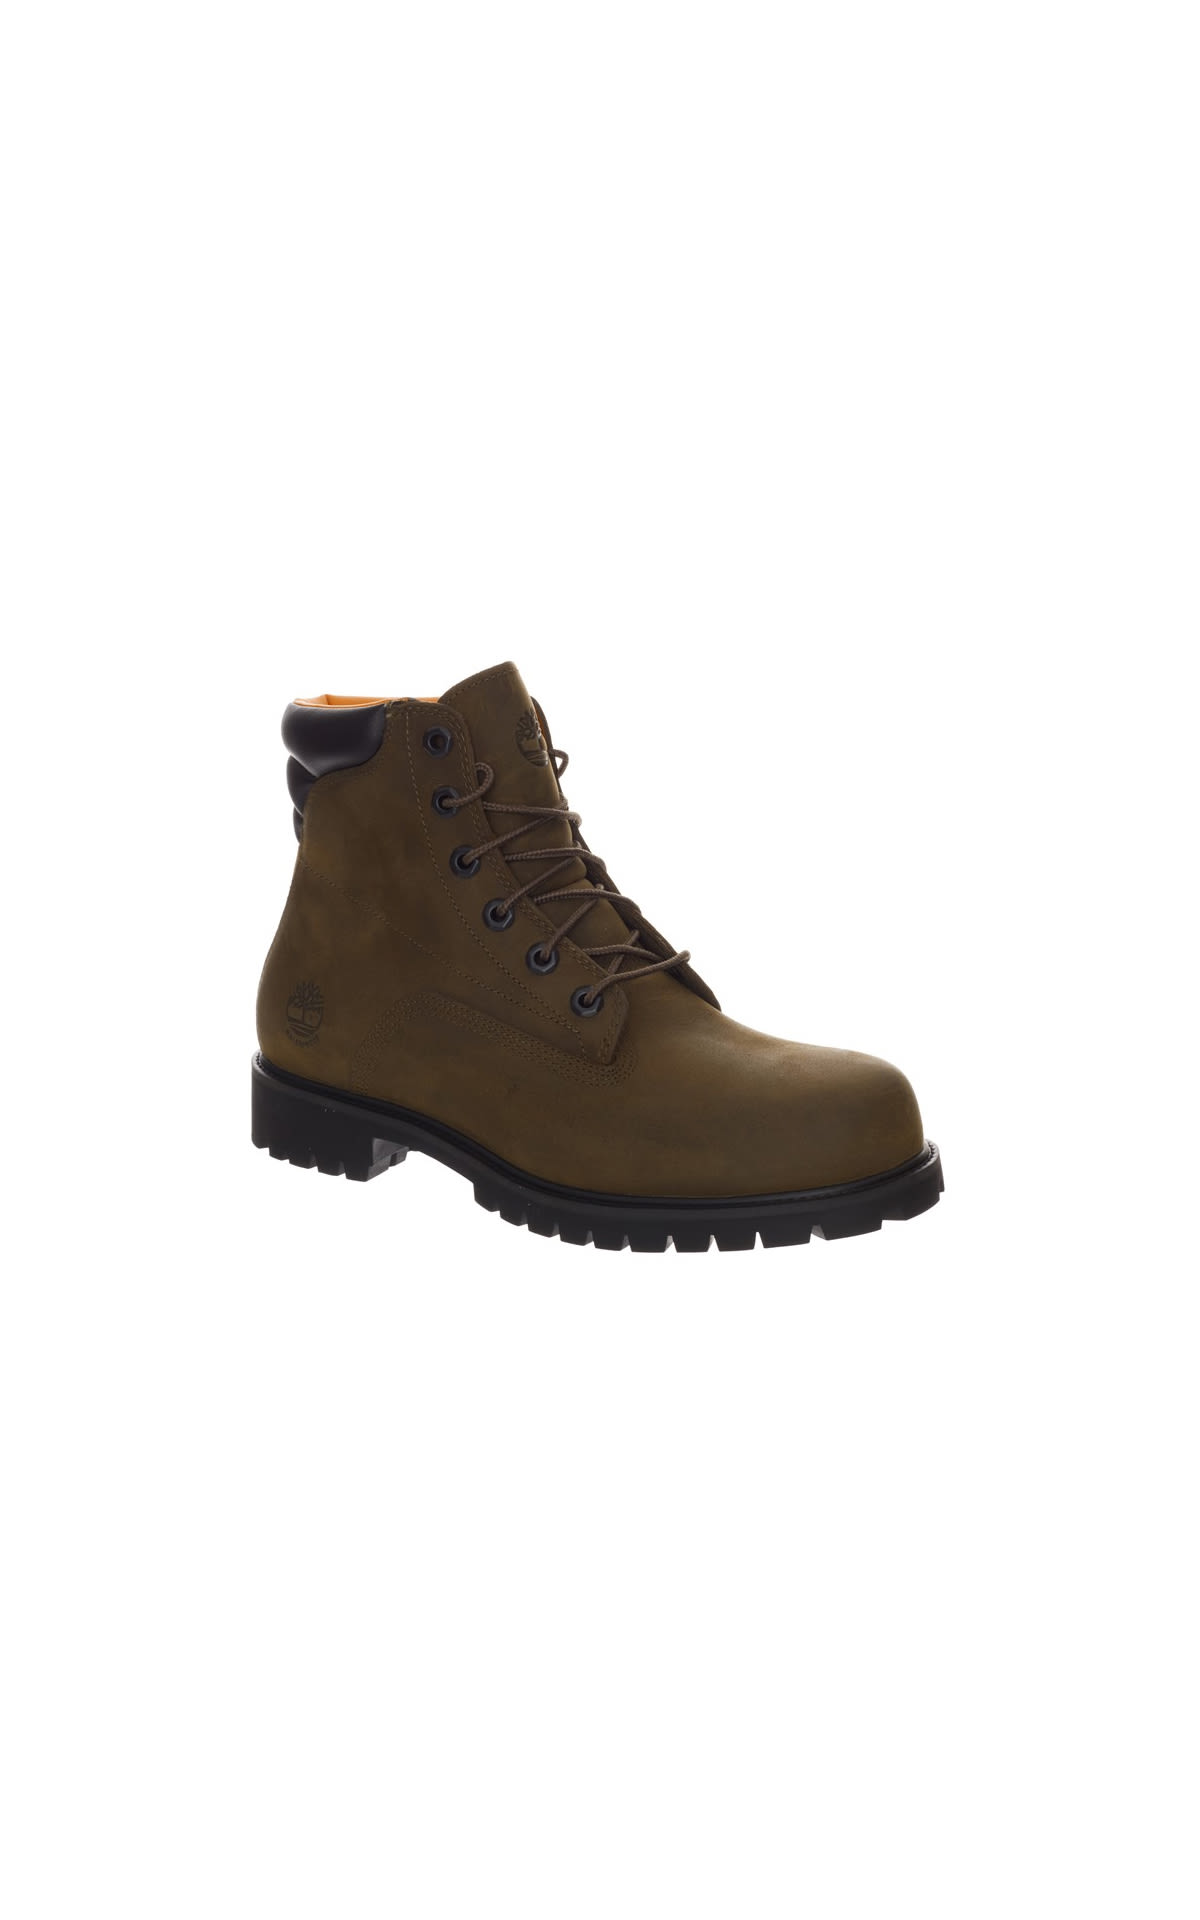 Timberland Alburn boots from Bicester Village